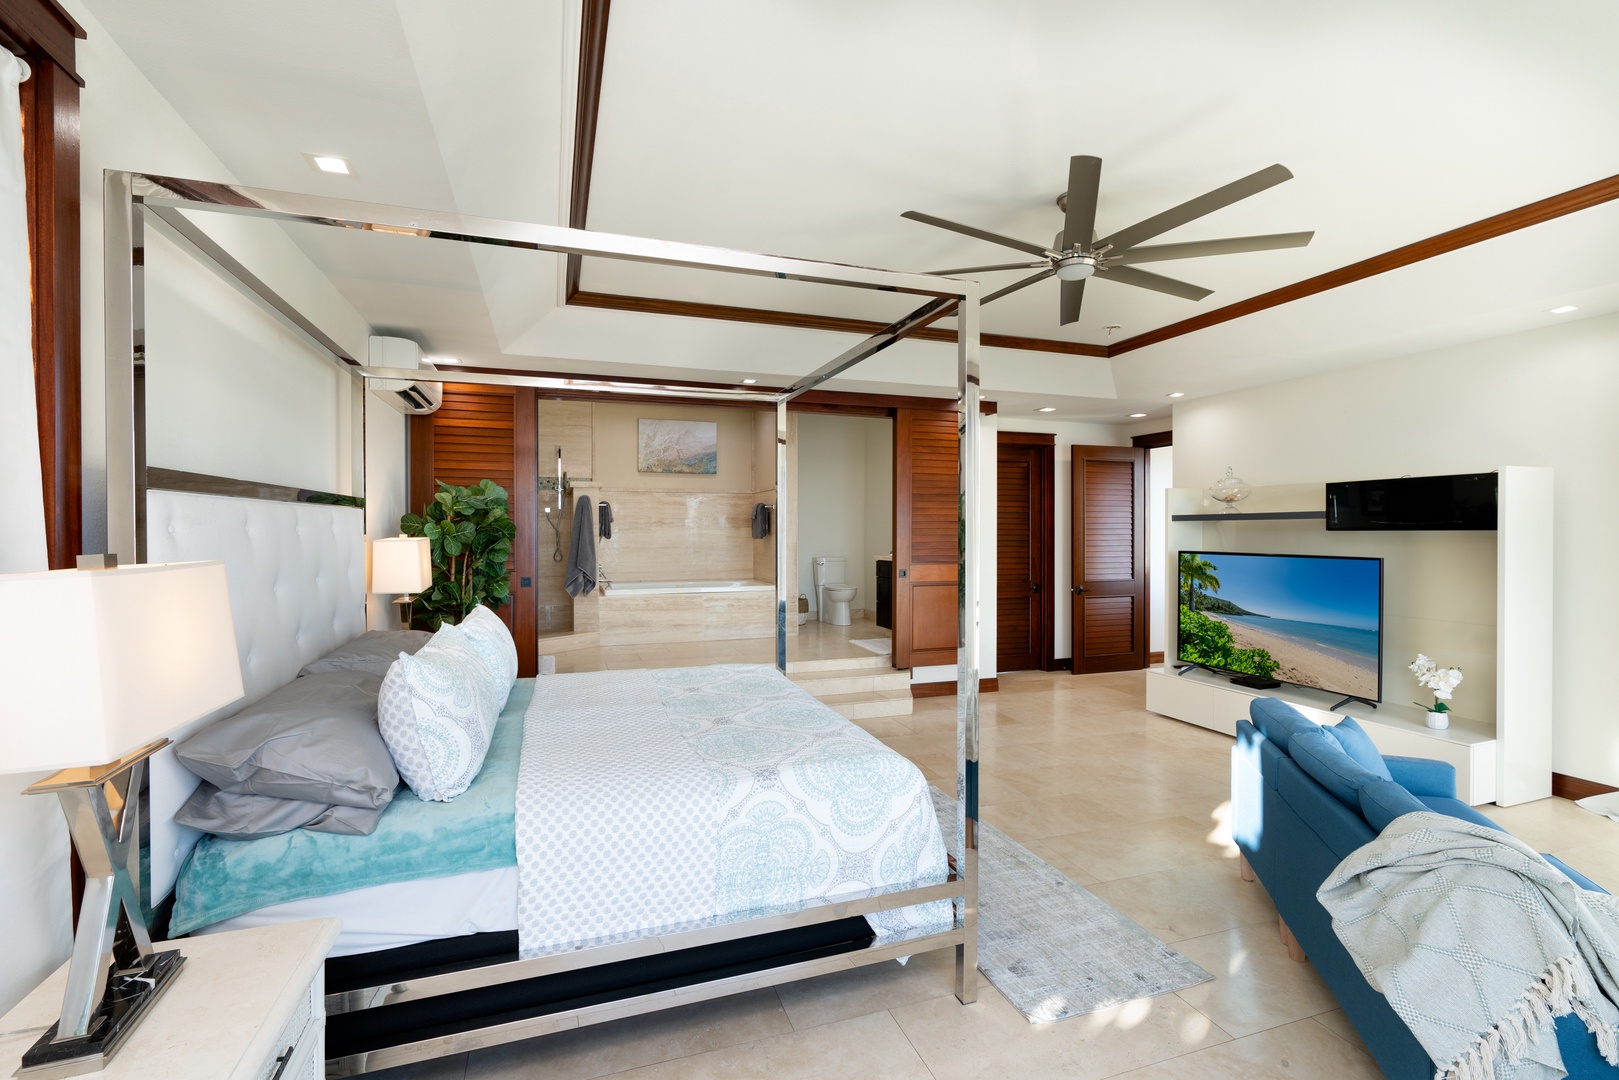 Honolulu Vacation Rentals, Wailupe Seaside - The large suite has luxurious bathroom ensuite and air conditioning.